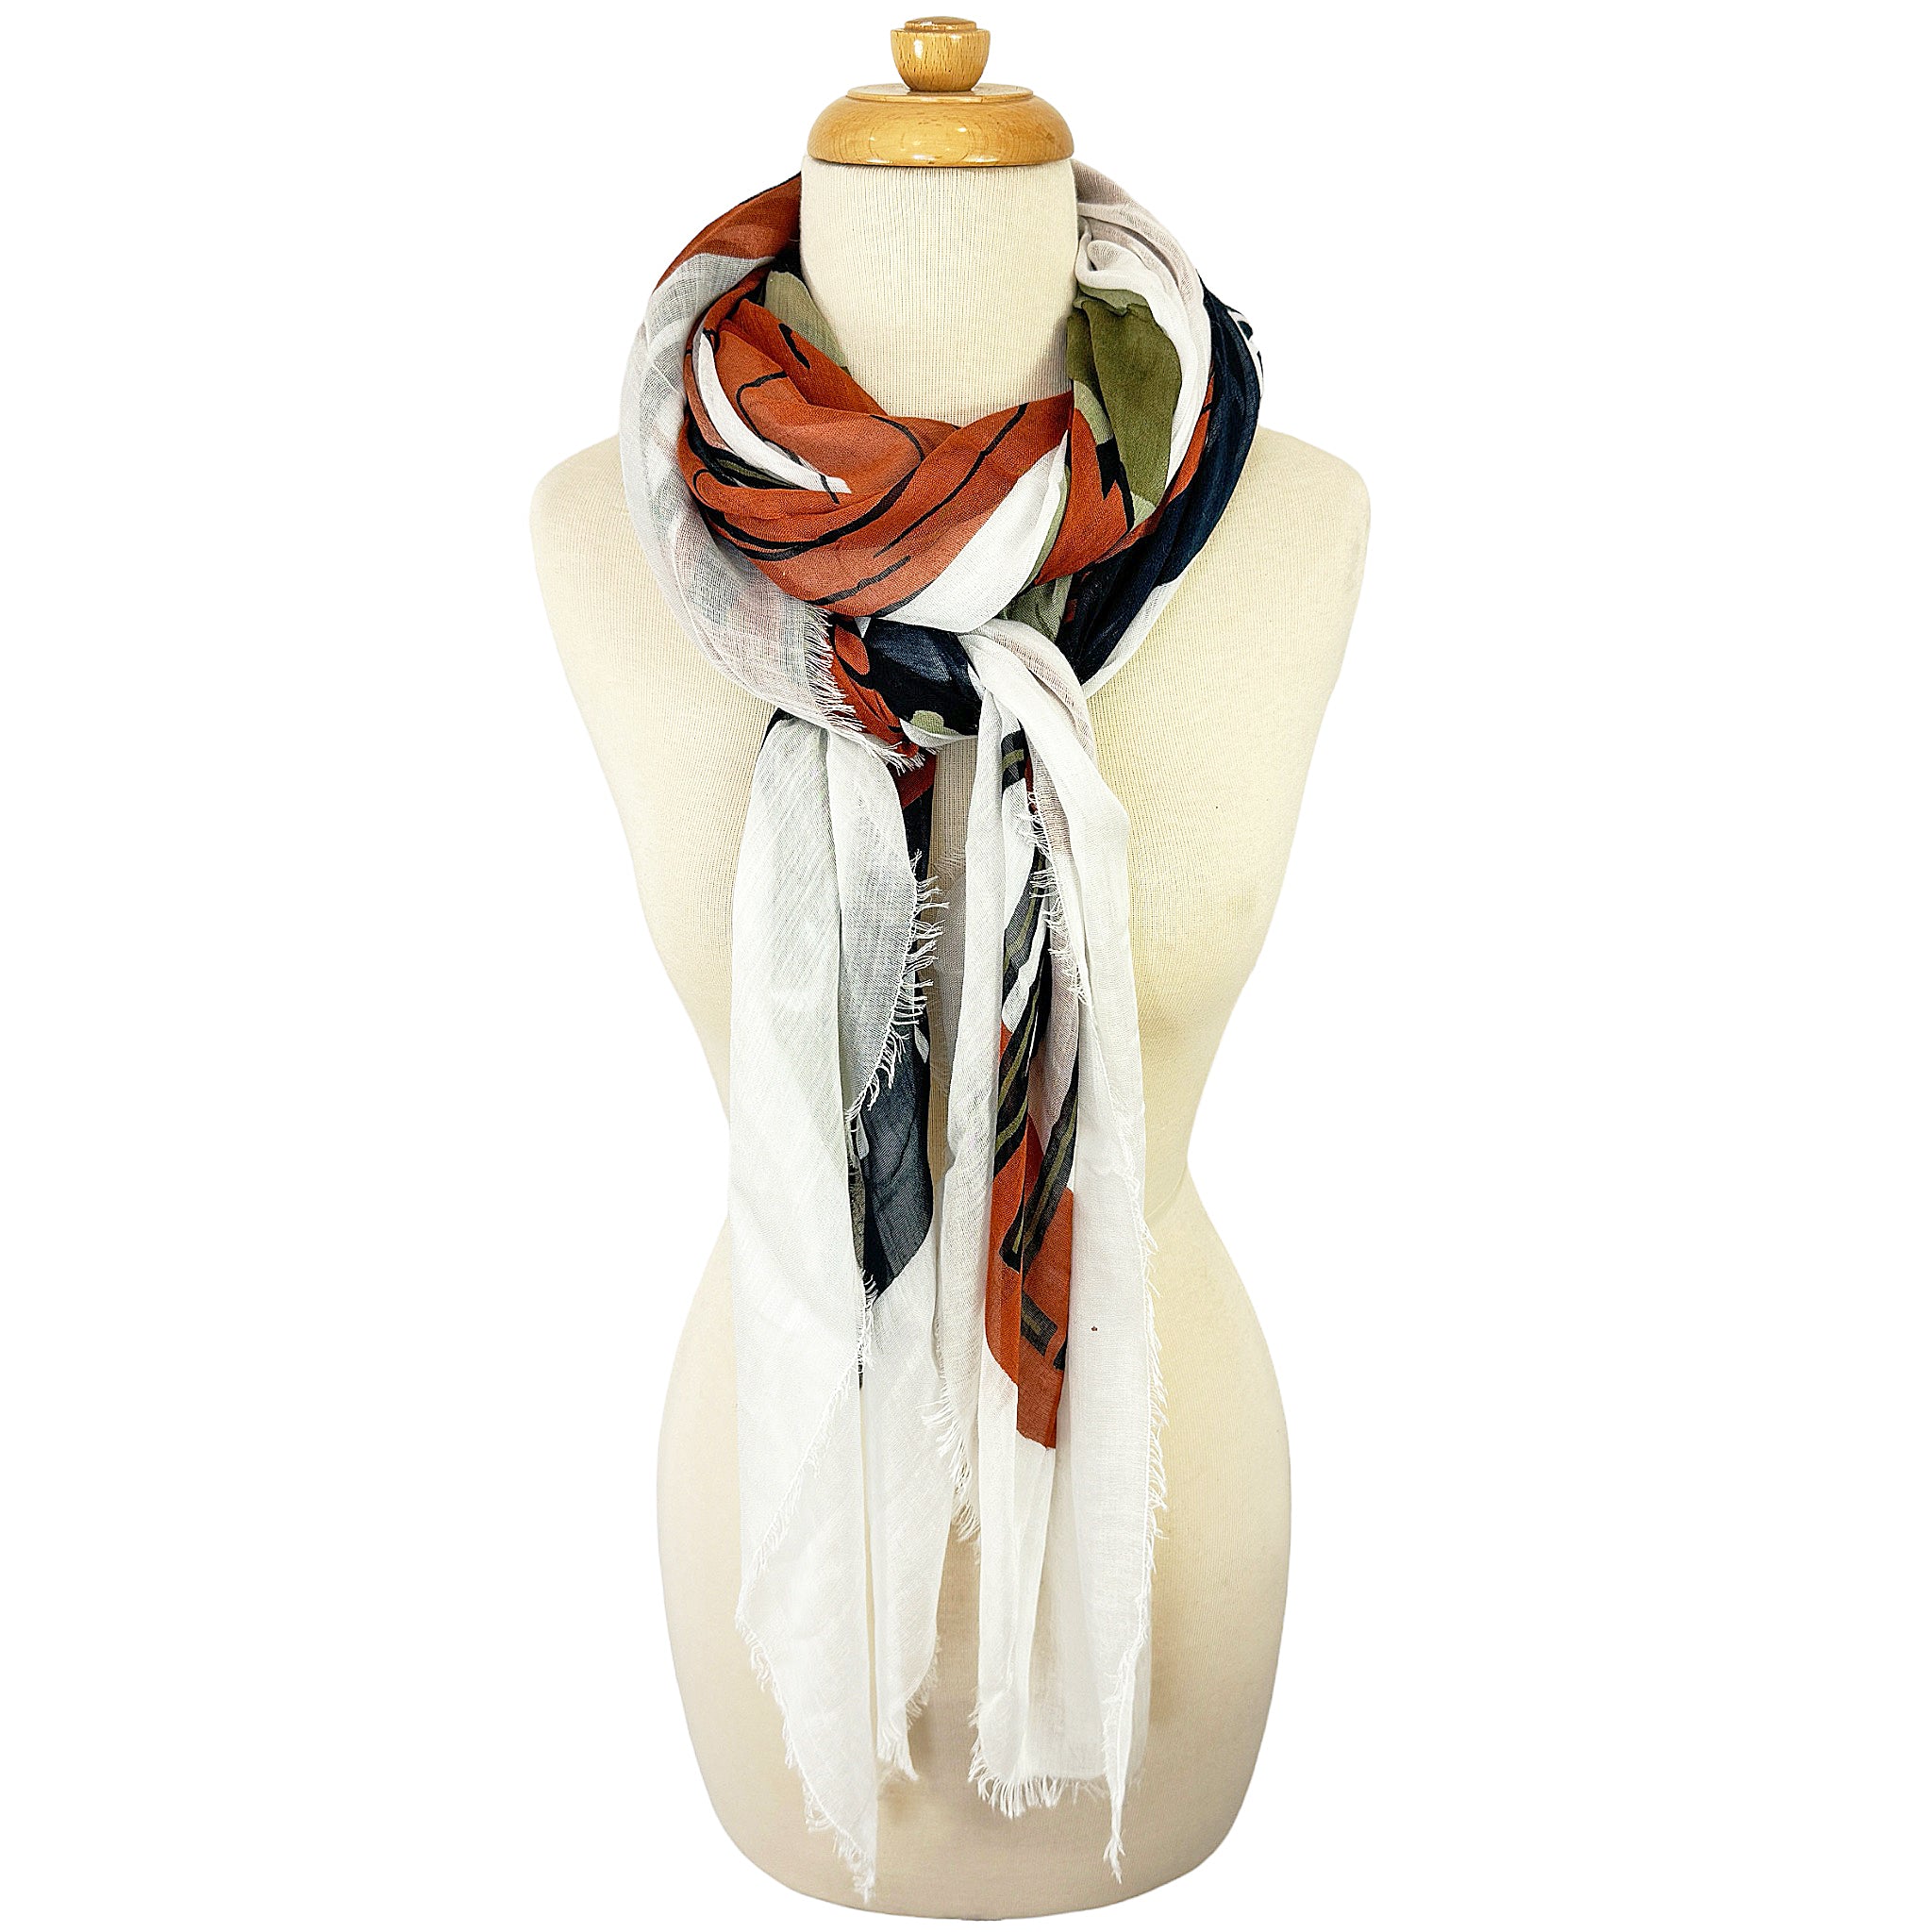 Blue Pacific Micromodal Vintage Vineyard Sonoma Scarf in Rust Olive and Black